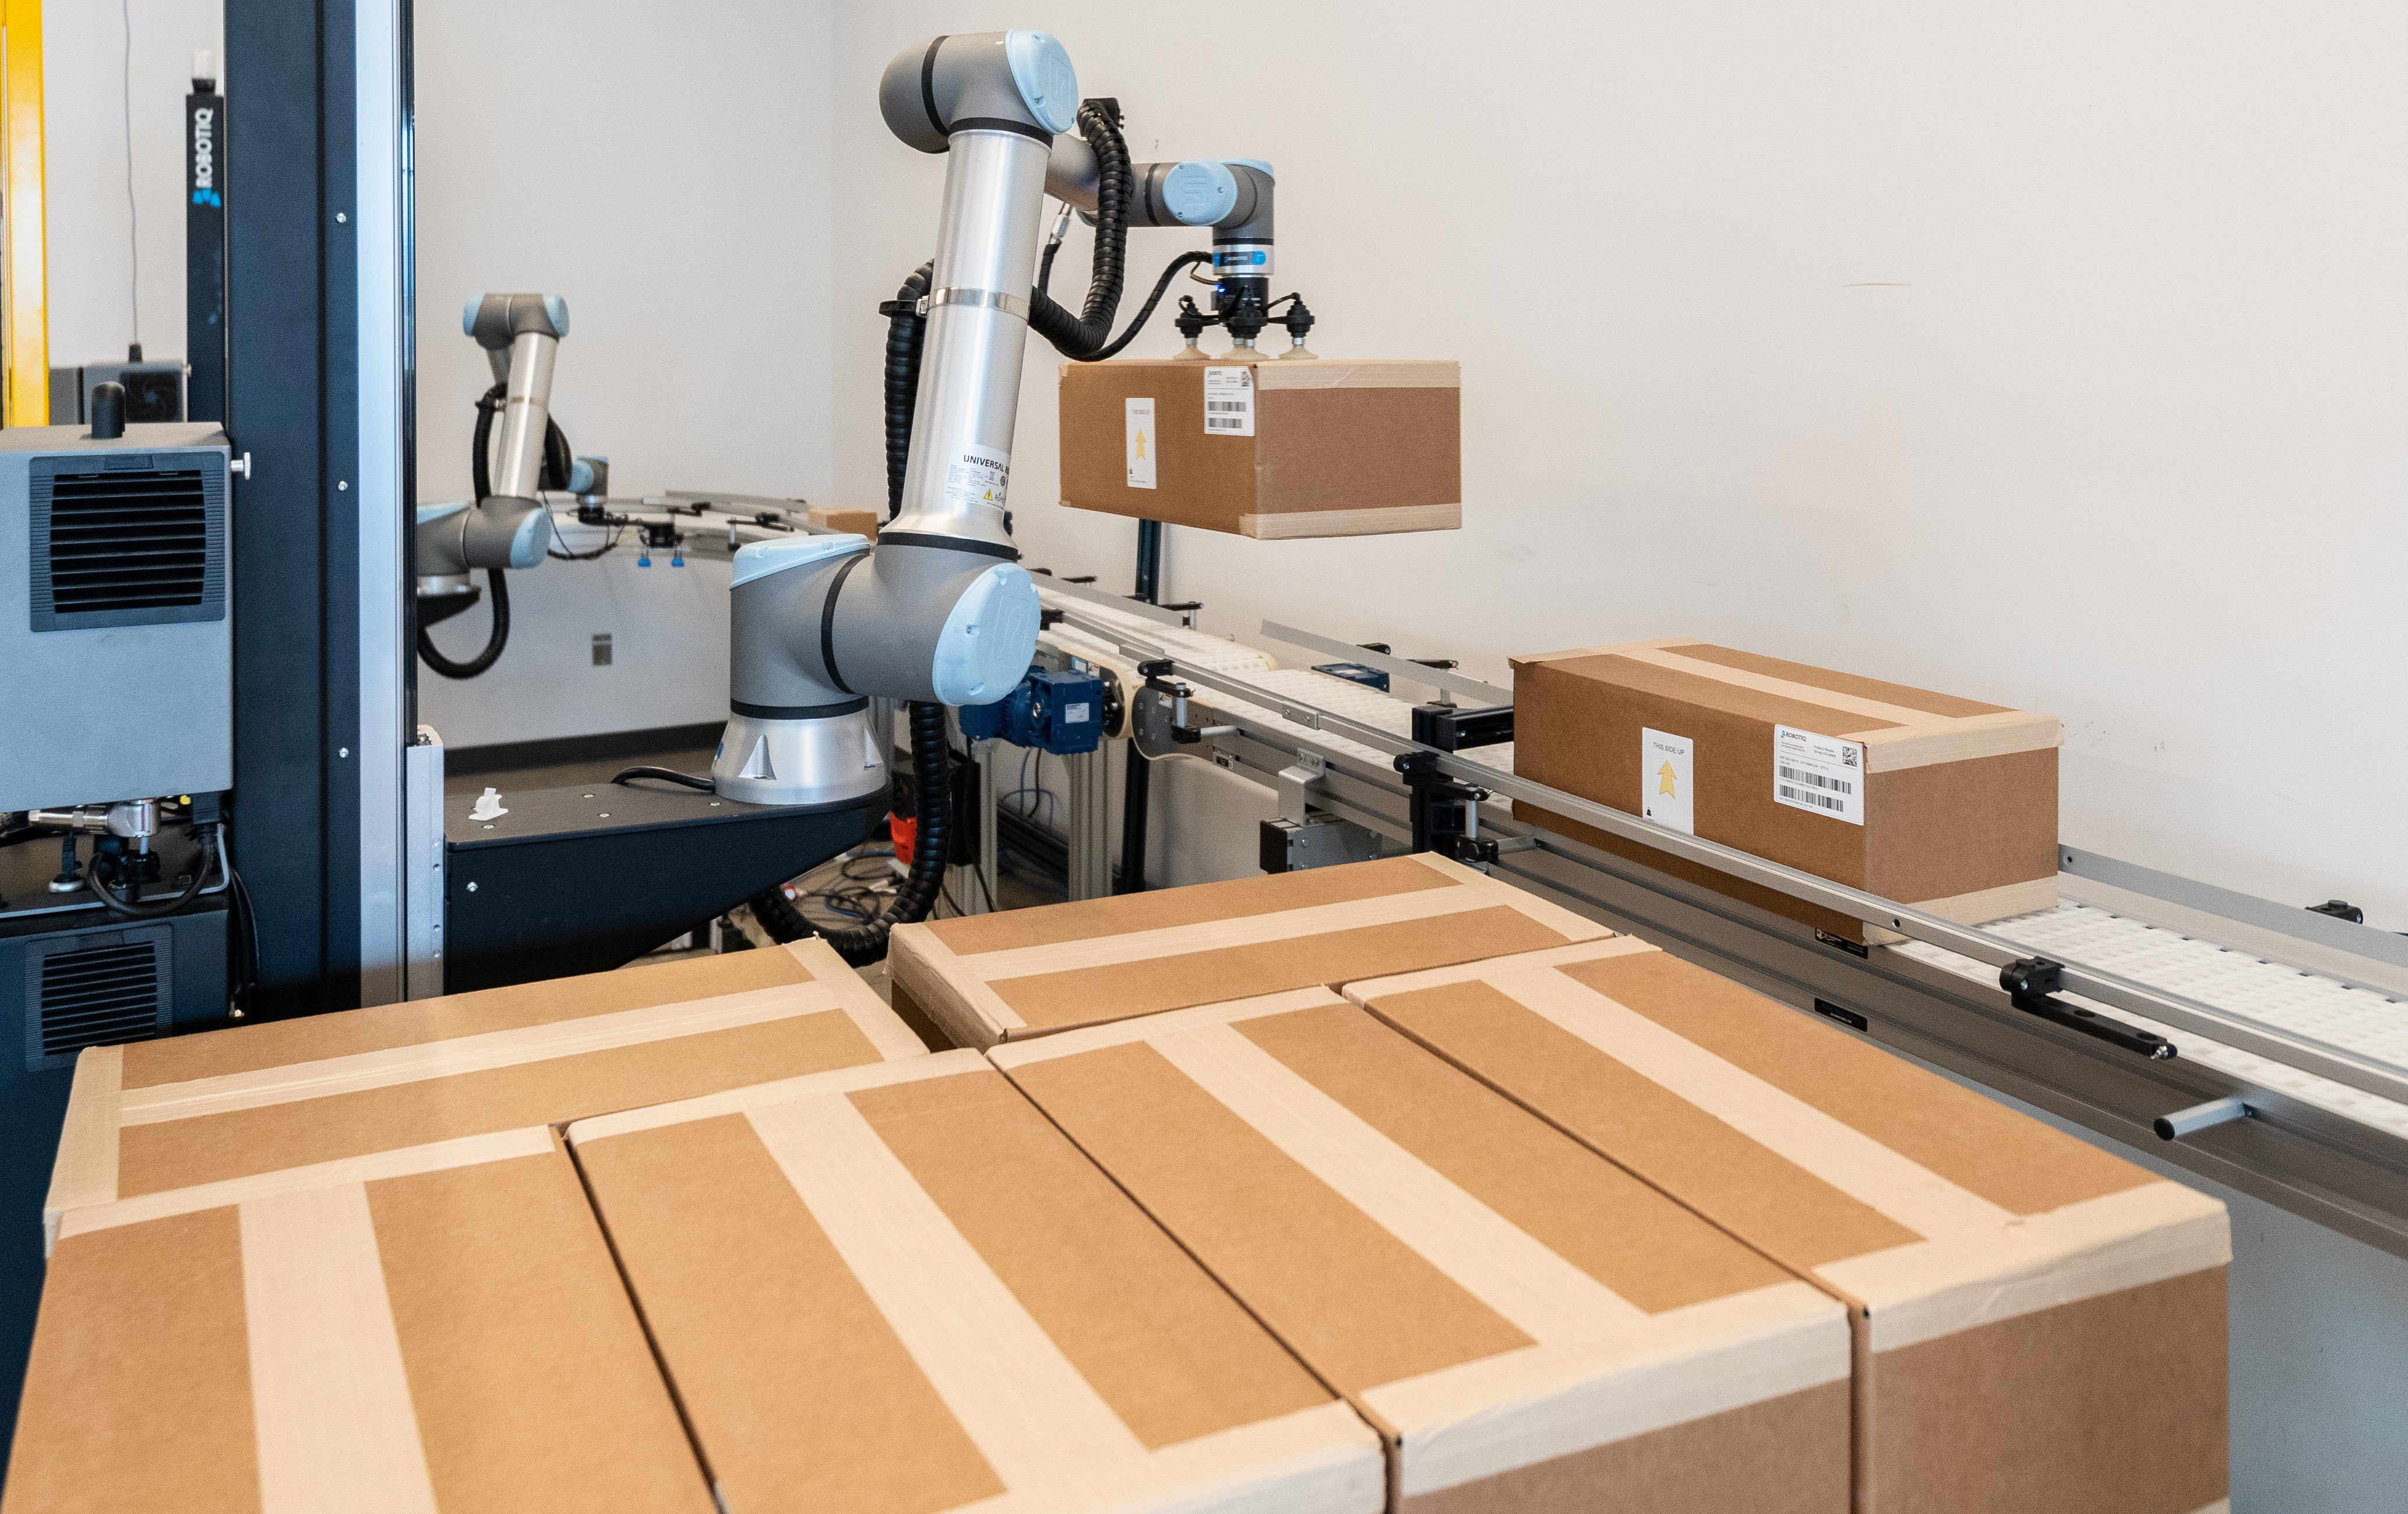 Robot palletizing boxes in the logistics industry